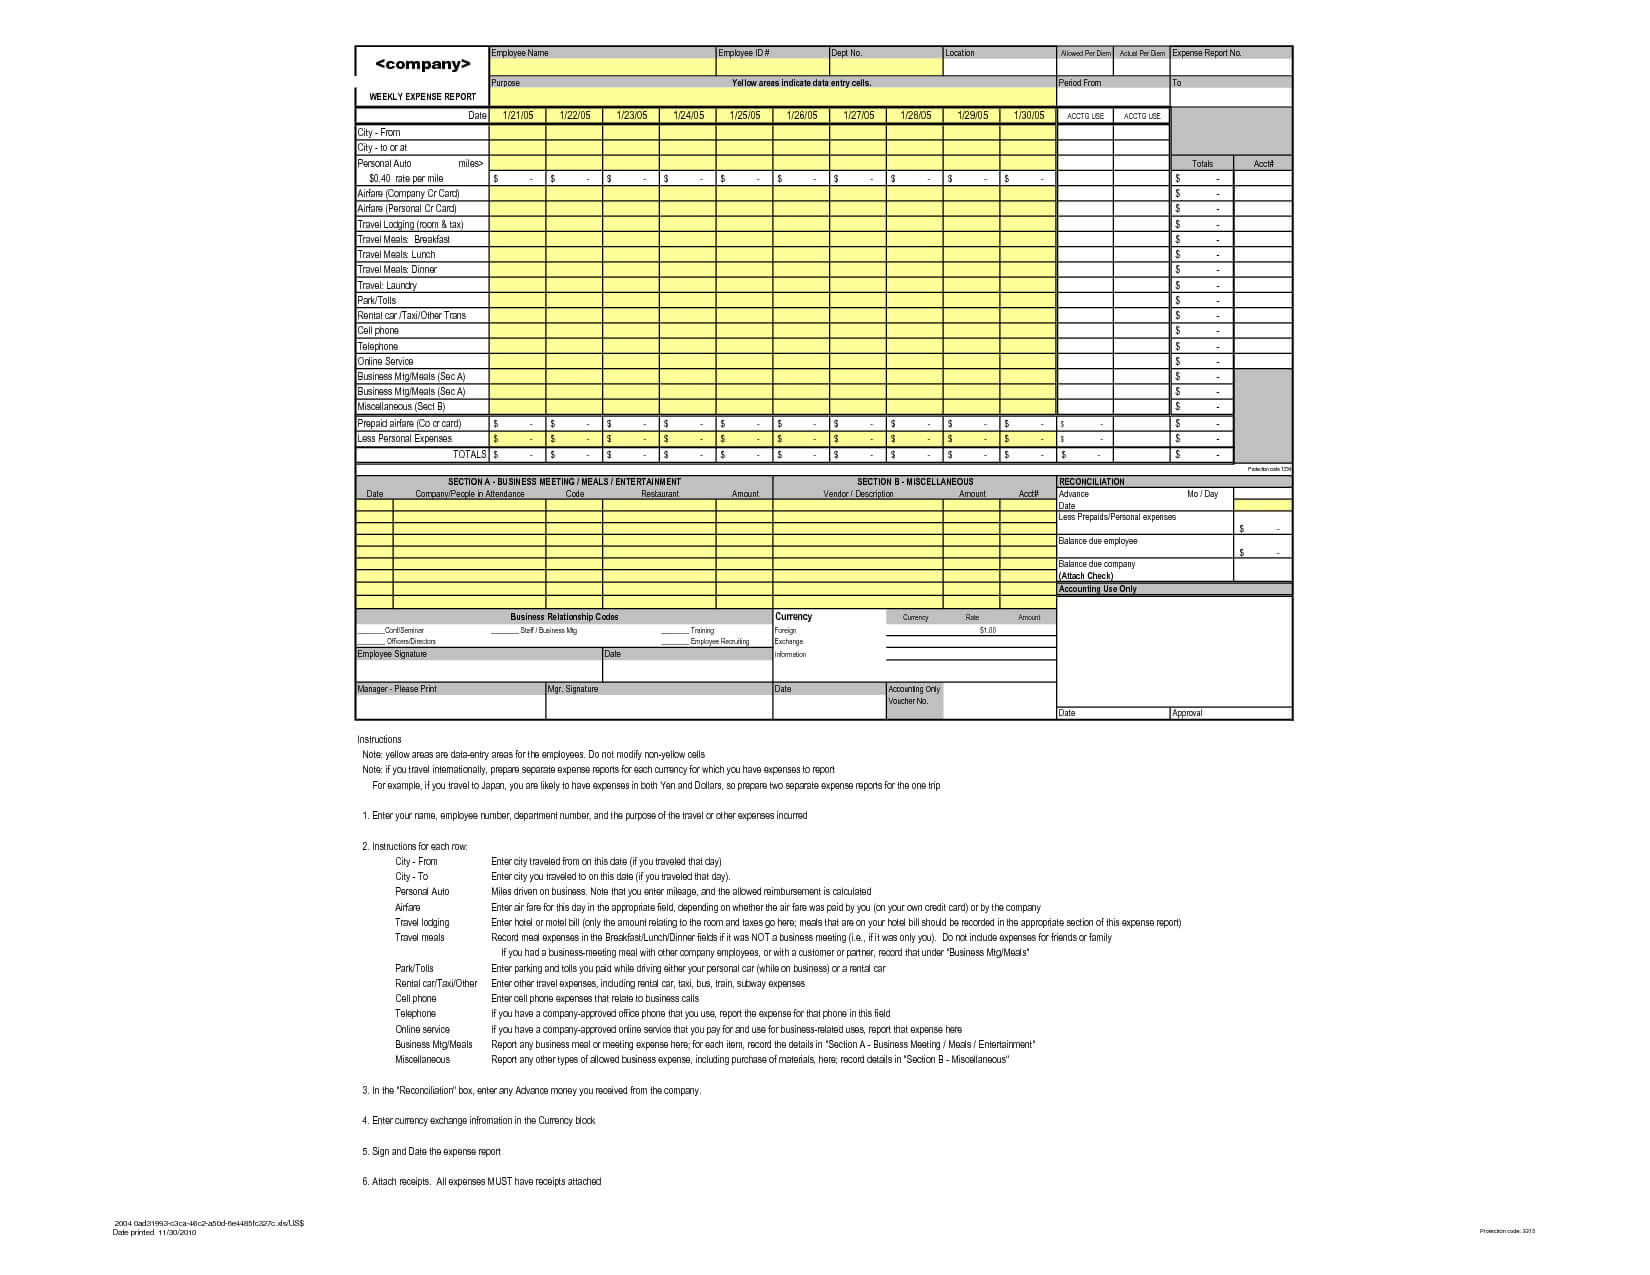 Business Travel Report Sample ] – Travel Expense Report Intended For Air Balance Report Template